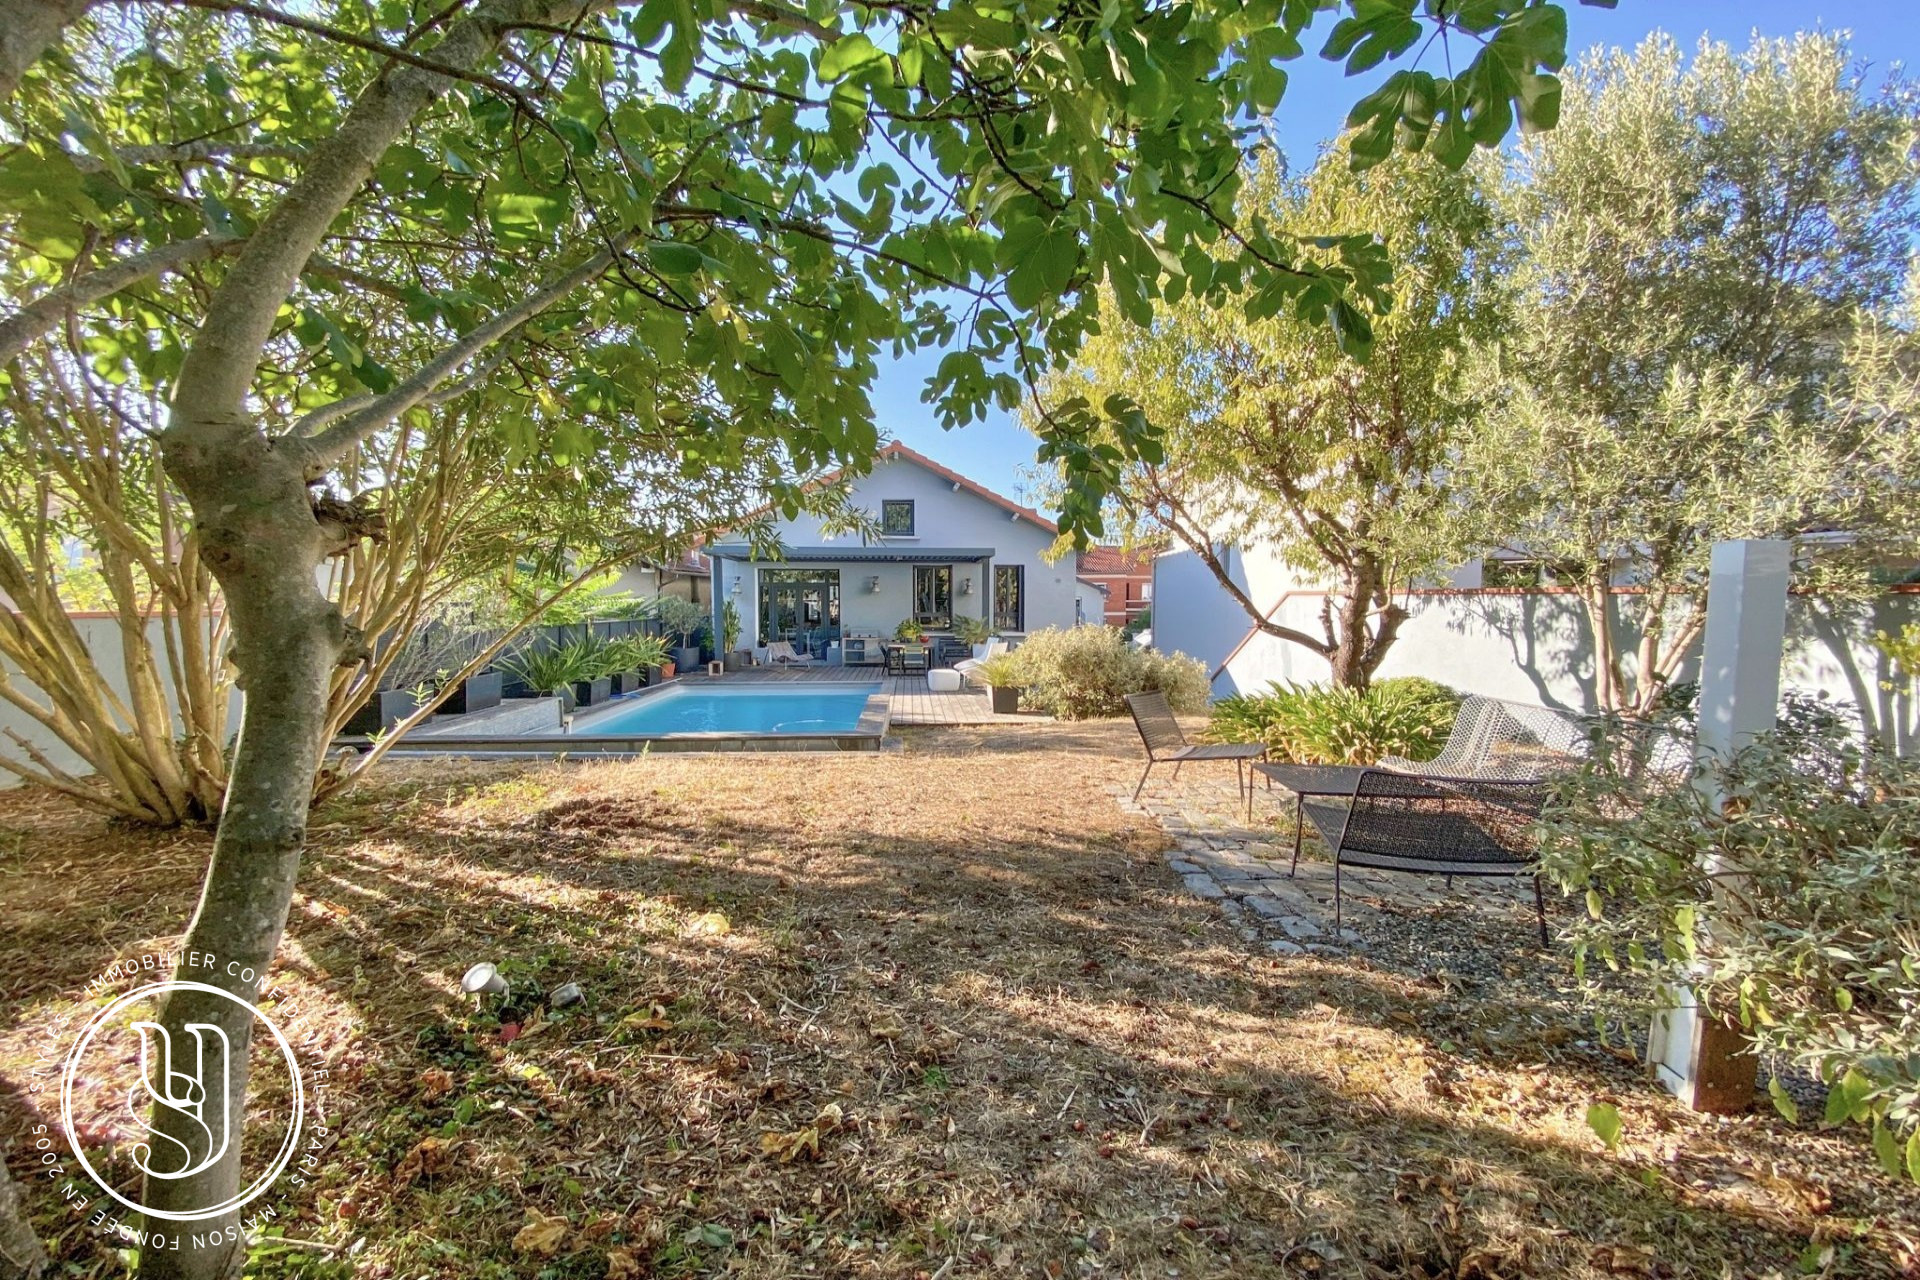 Toulouse - under offer, Family house from the 1930s with garden, swimming - image 1